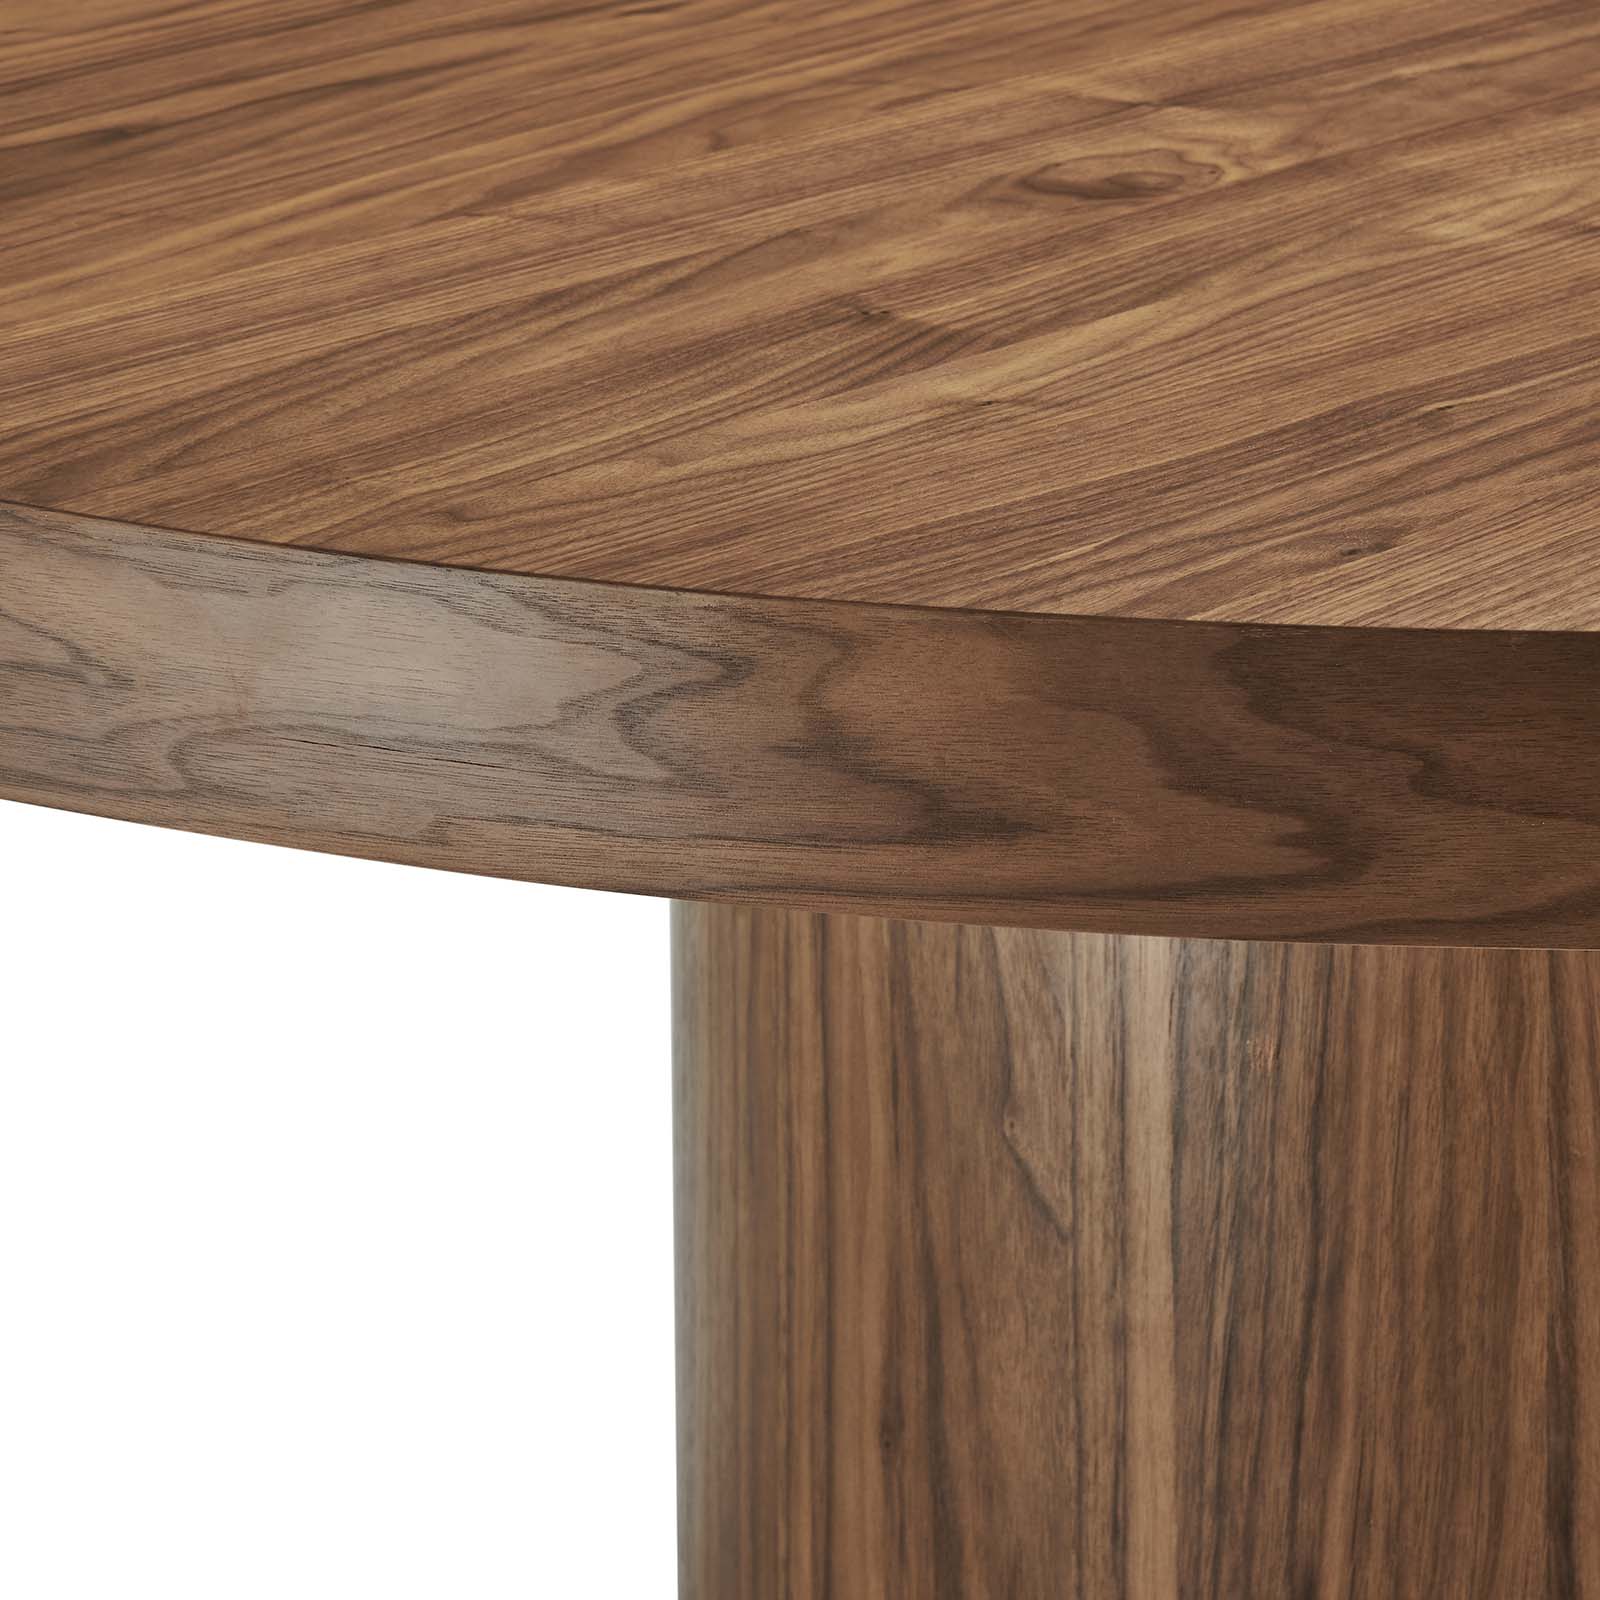 Gratify 60" Round Dining Table - East Shore Modern Home Furnishings